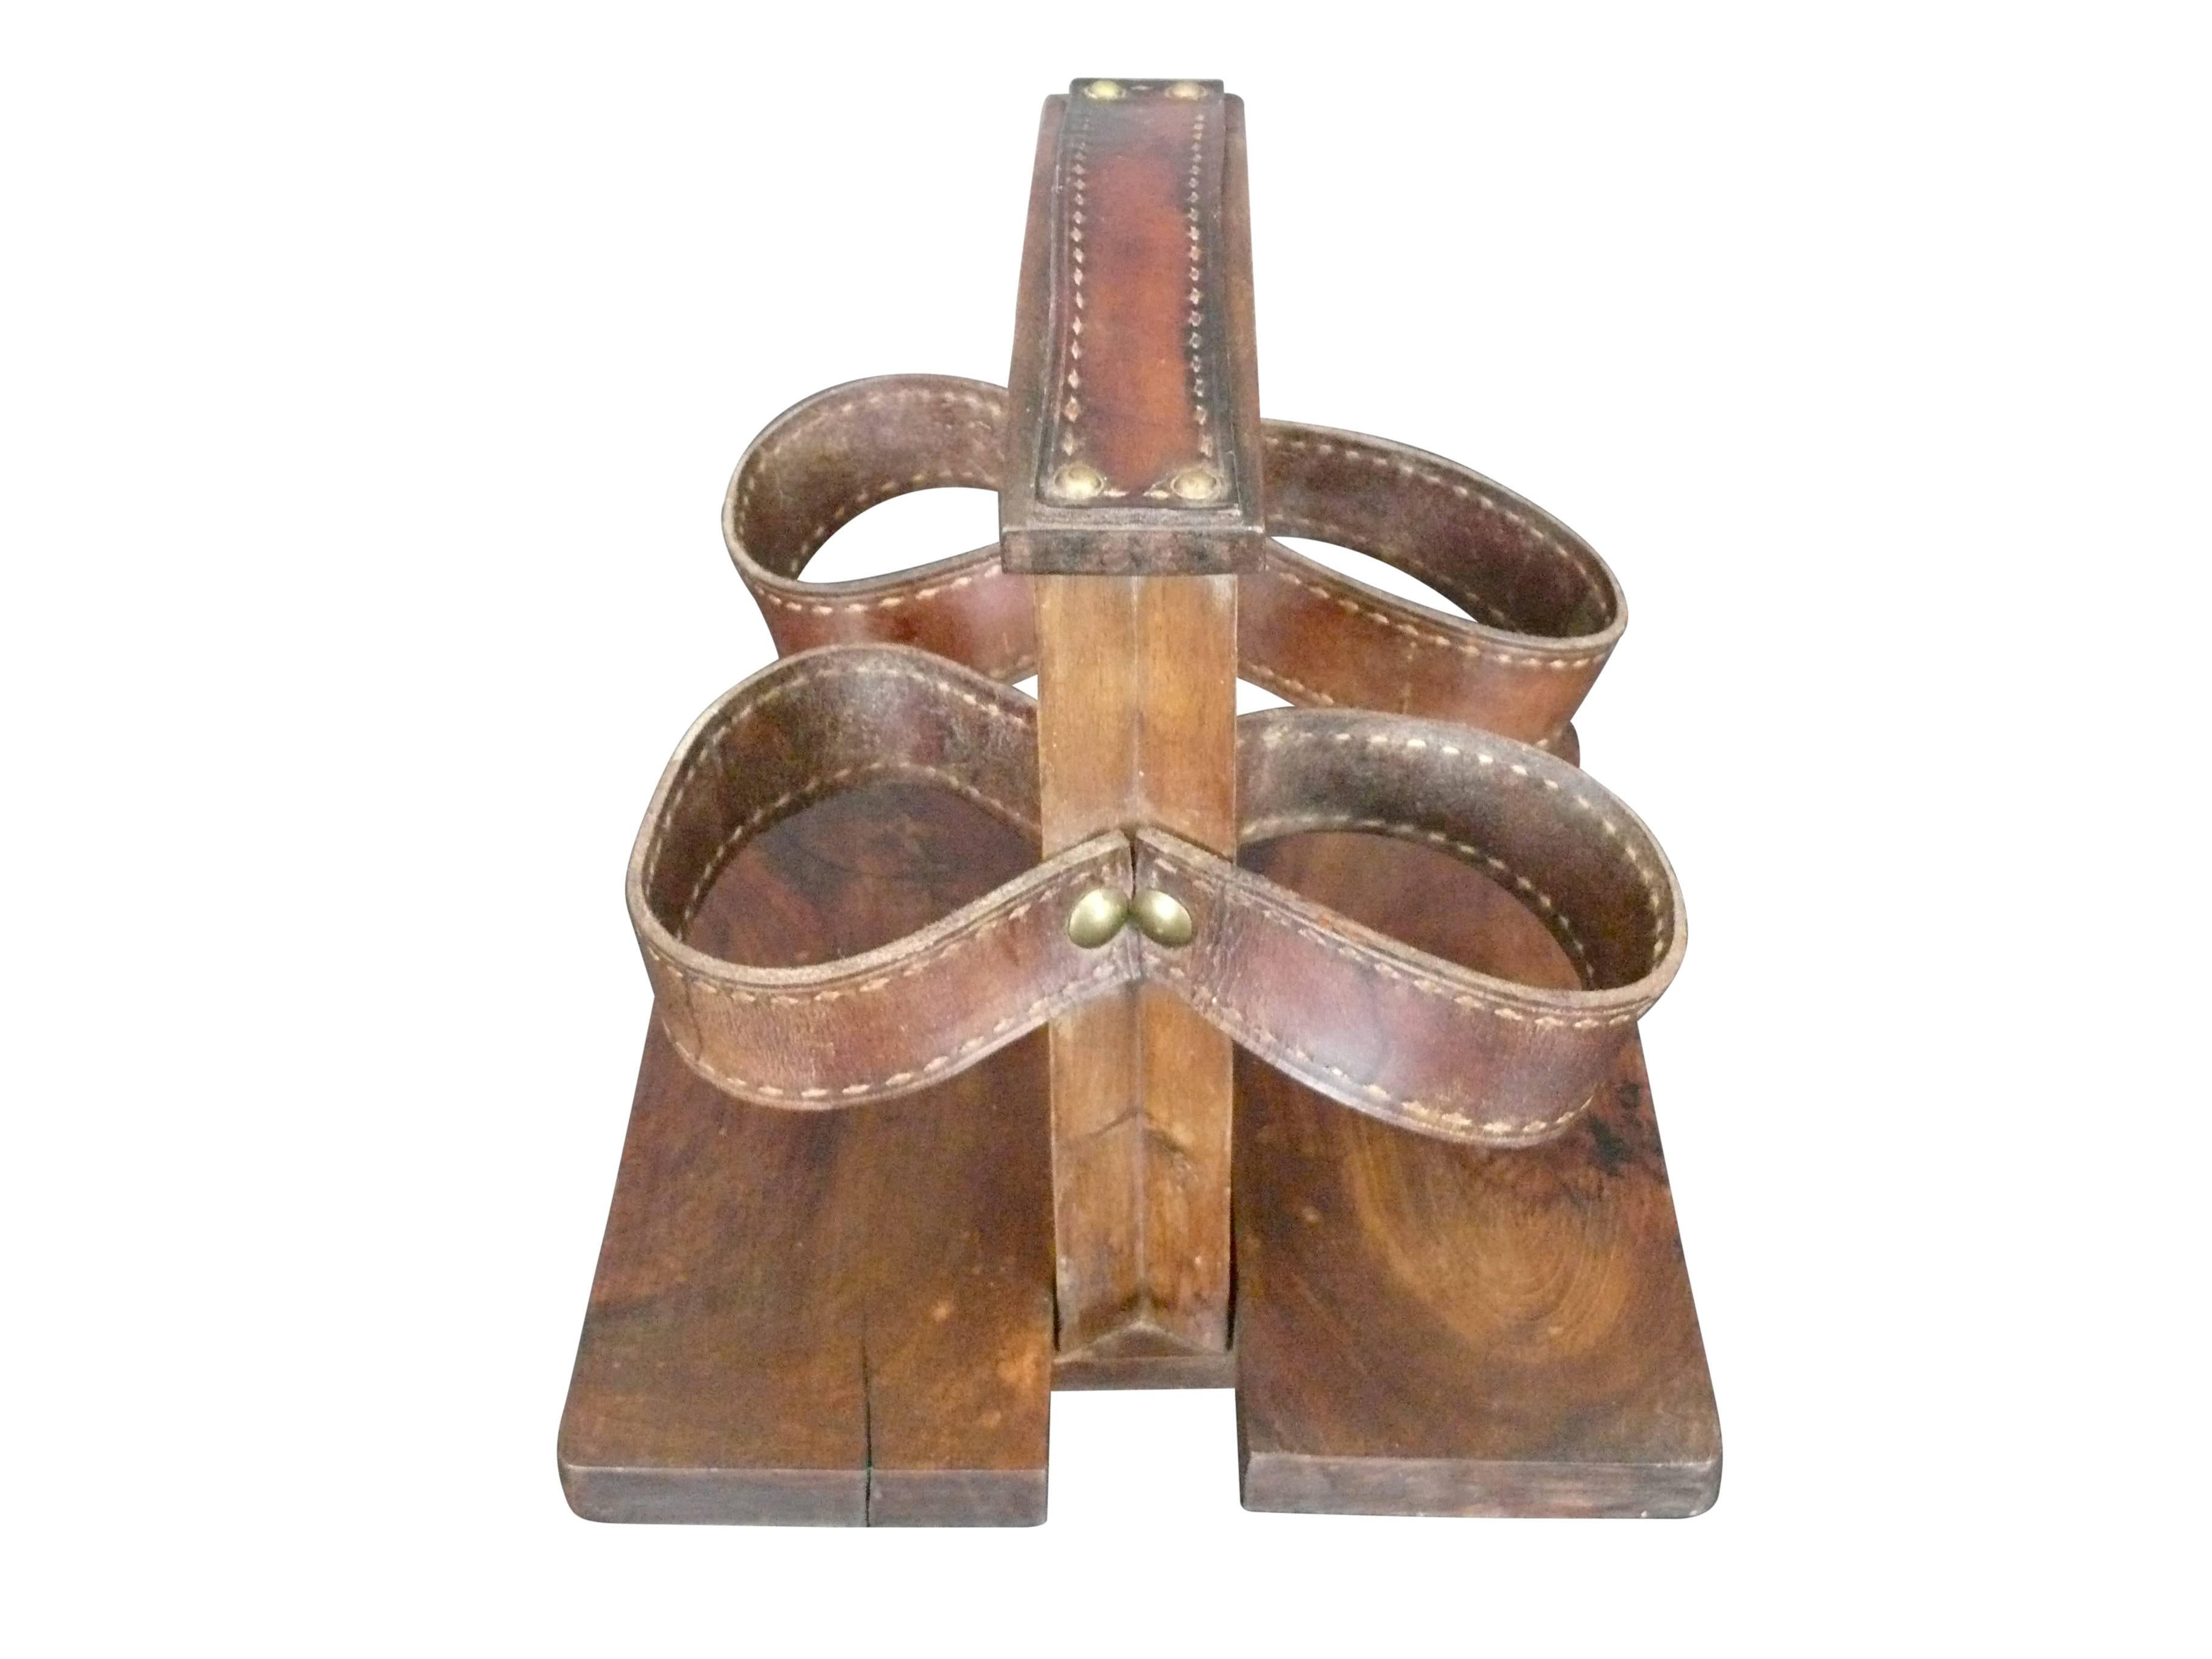 Handsome French tabletop wine holder in the style of Jacques Adnet. Oak base and frame with saddle leather details and straps. Complete with brass hardware and characteristic contrast stitch.